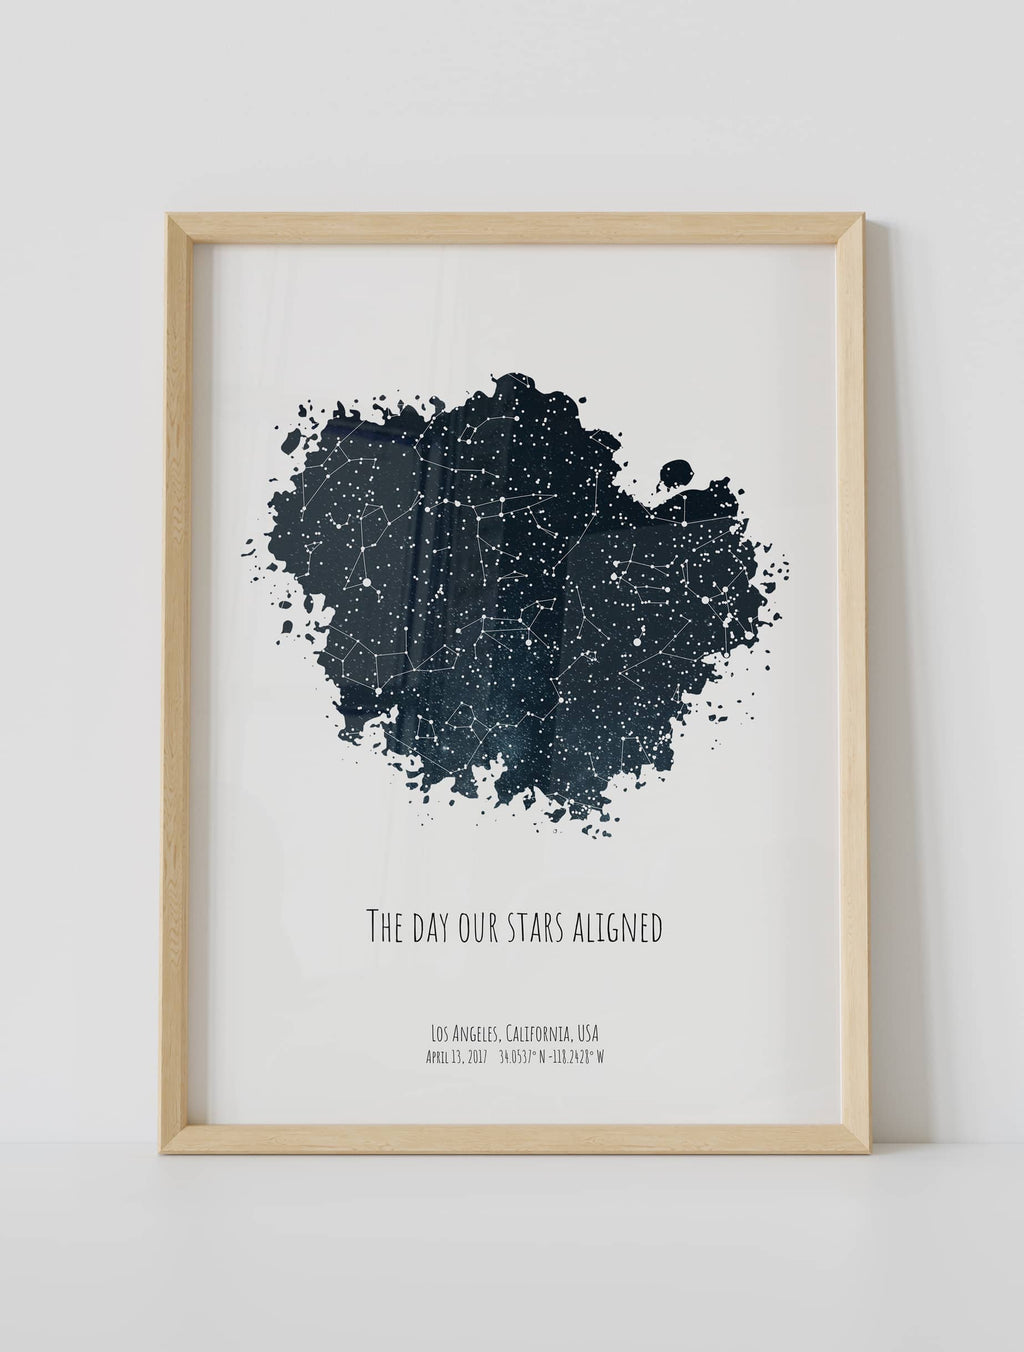 A framed star map poster featuring a specific date and location, customized with the quote "The day our stars aligned"